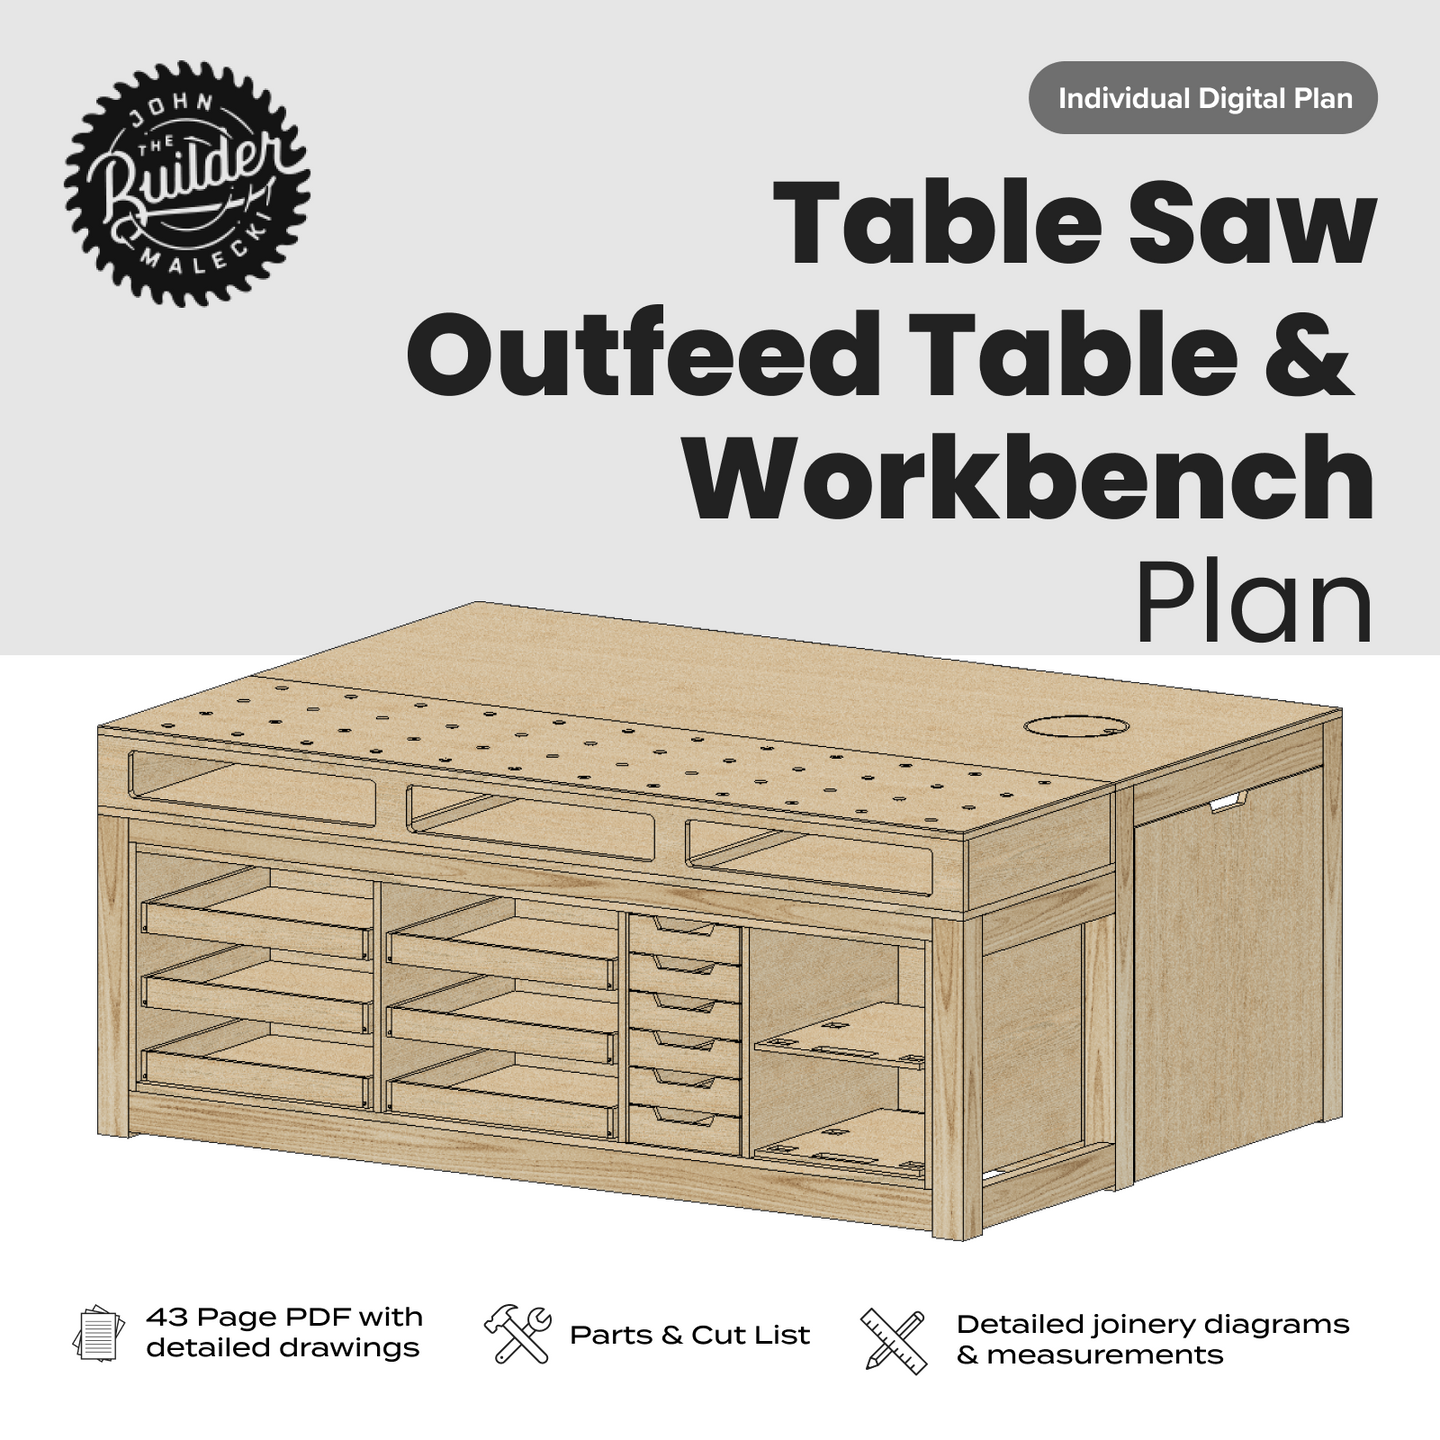 Table Saw Outfeed Table & Workbench Templates - John Malecki Store